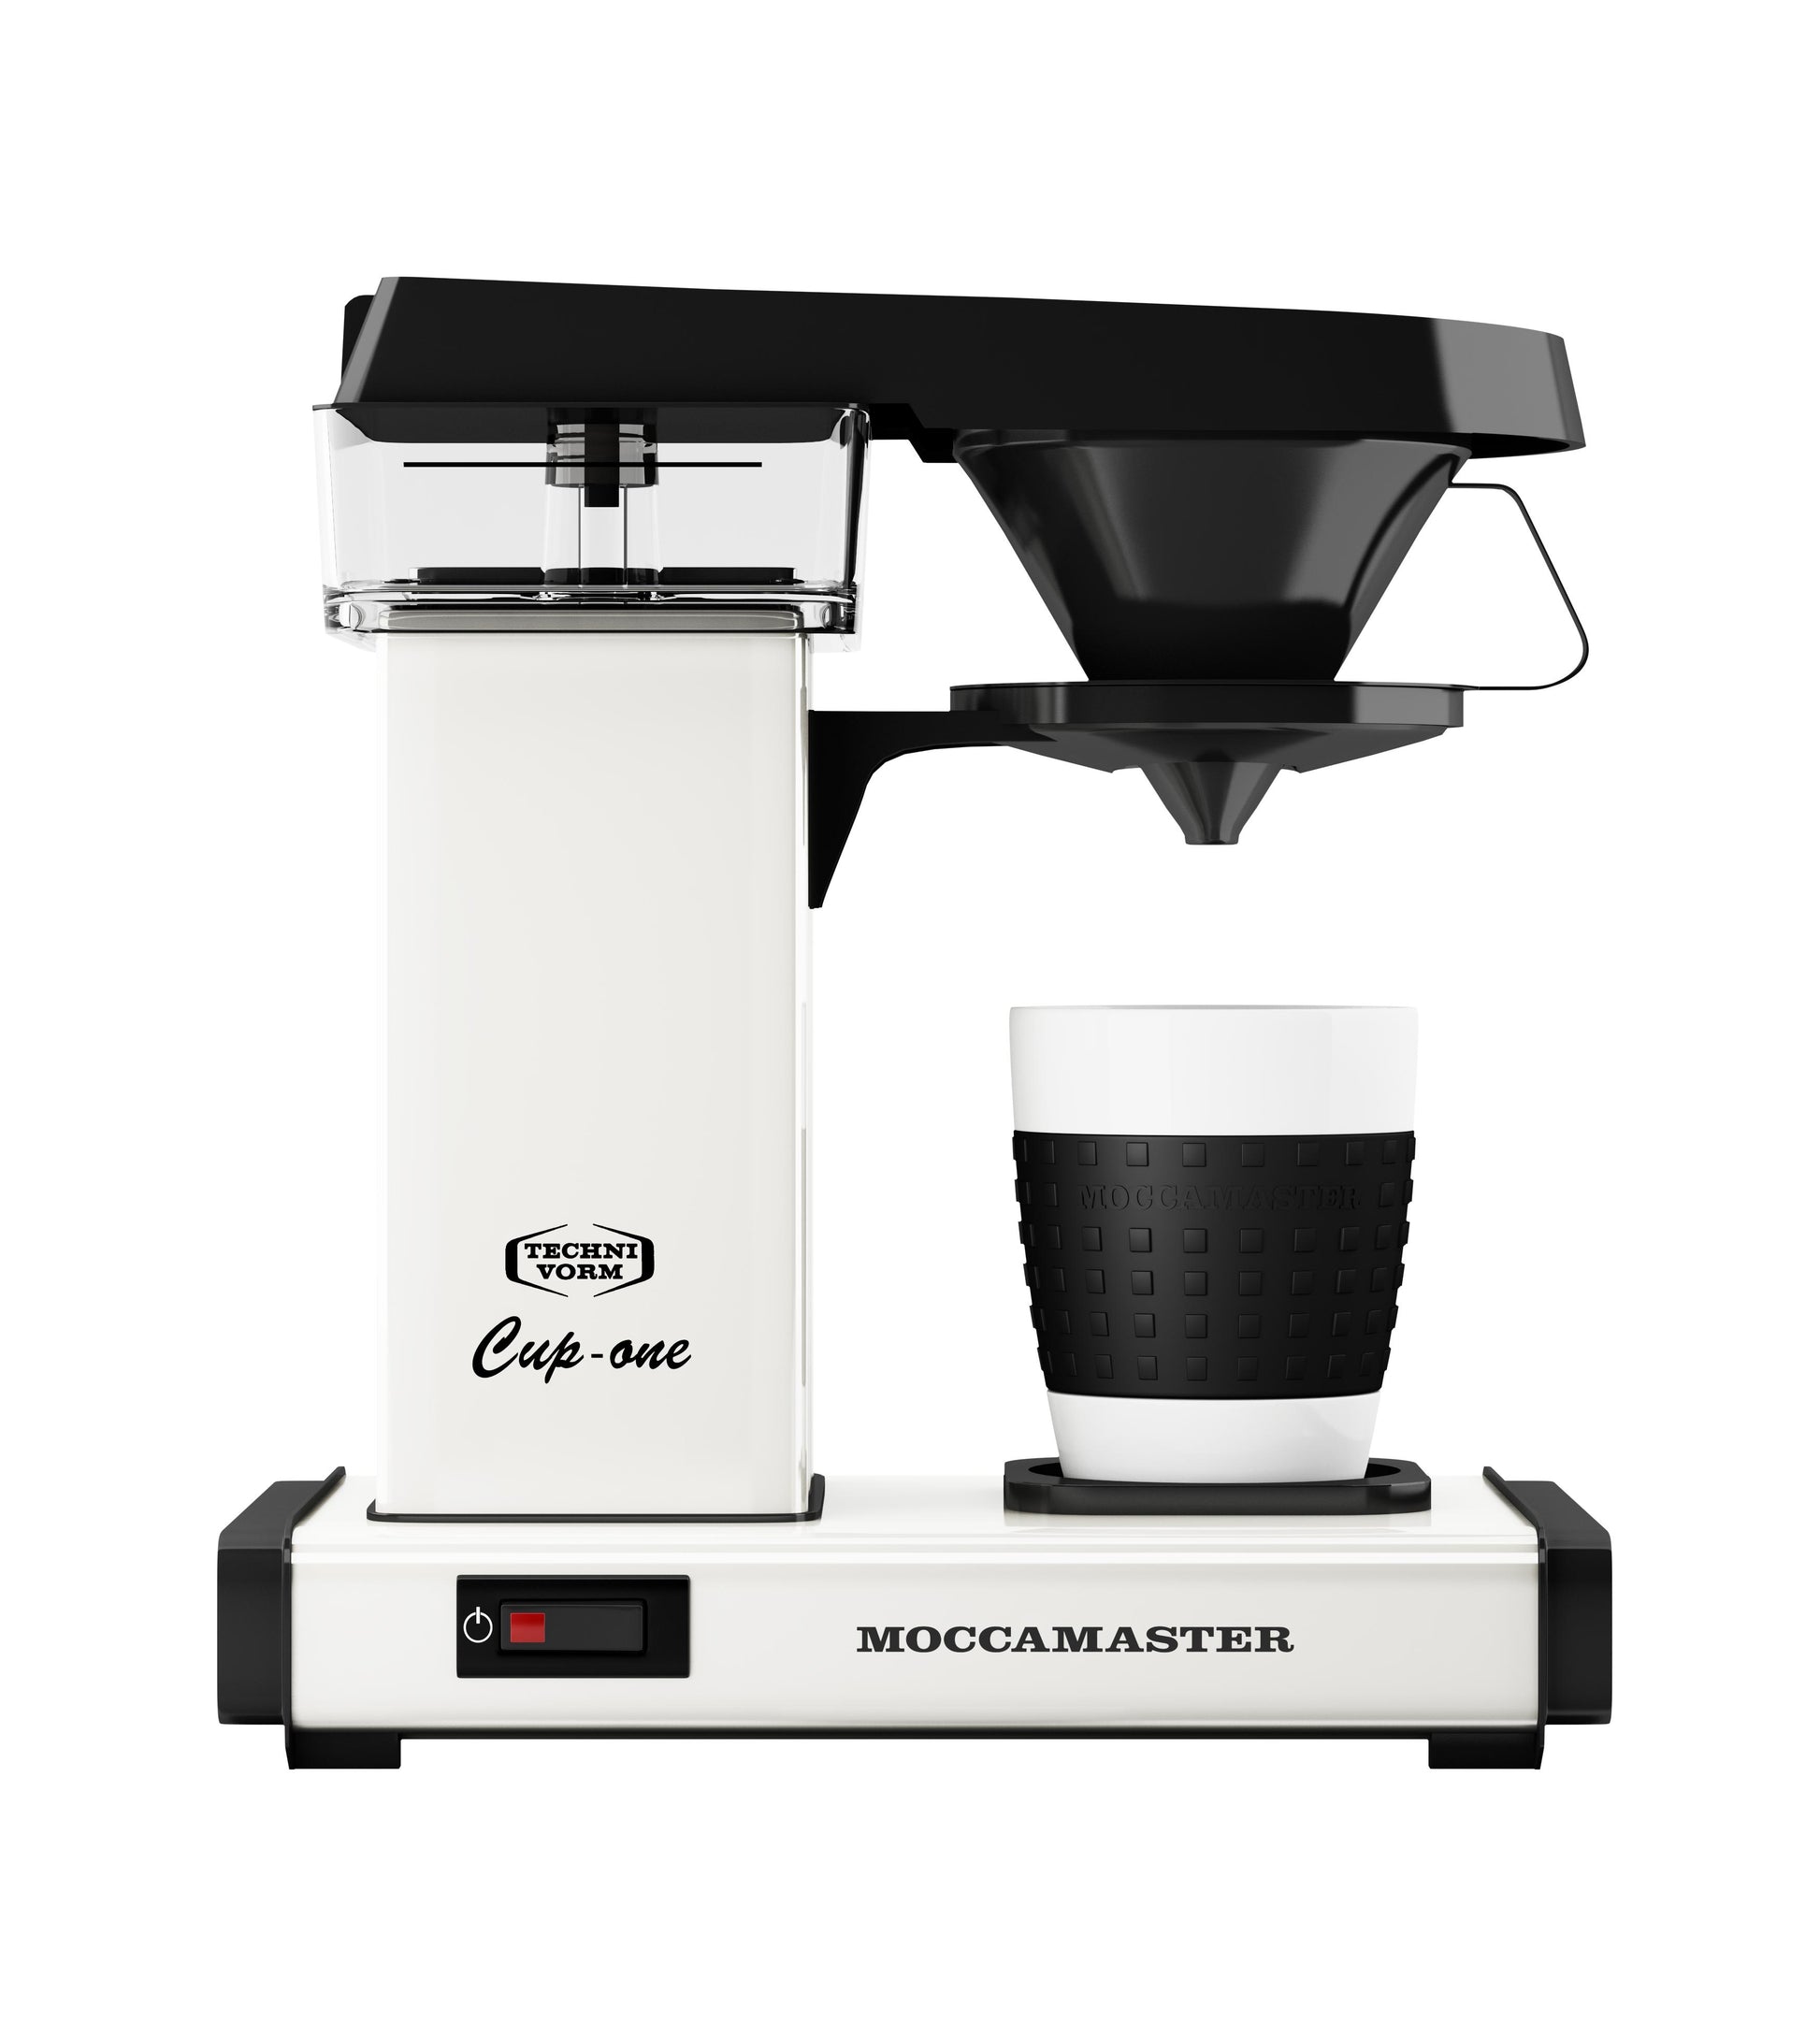 Moccamaster - Cup One Wholesaler and Supplier in Kuwait (Off White Colour)